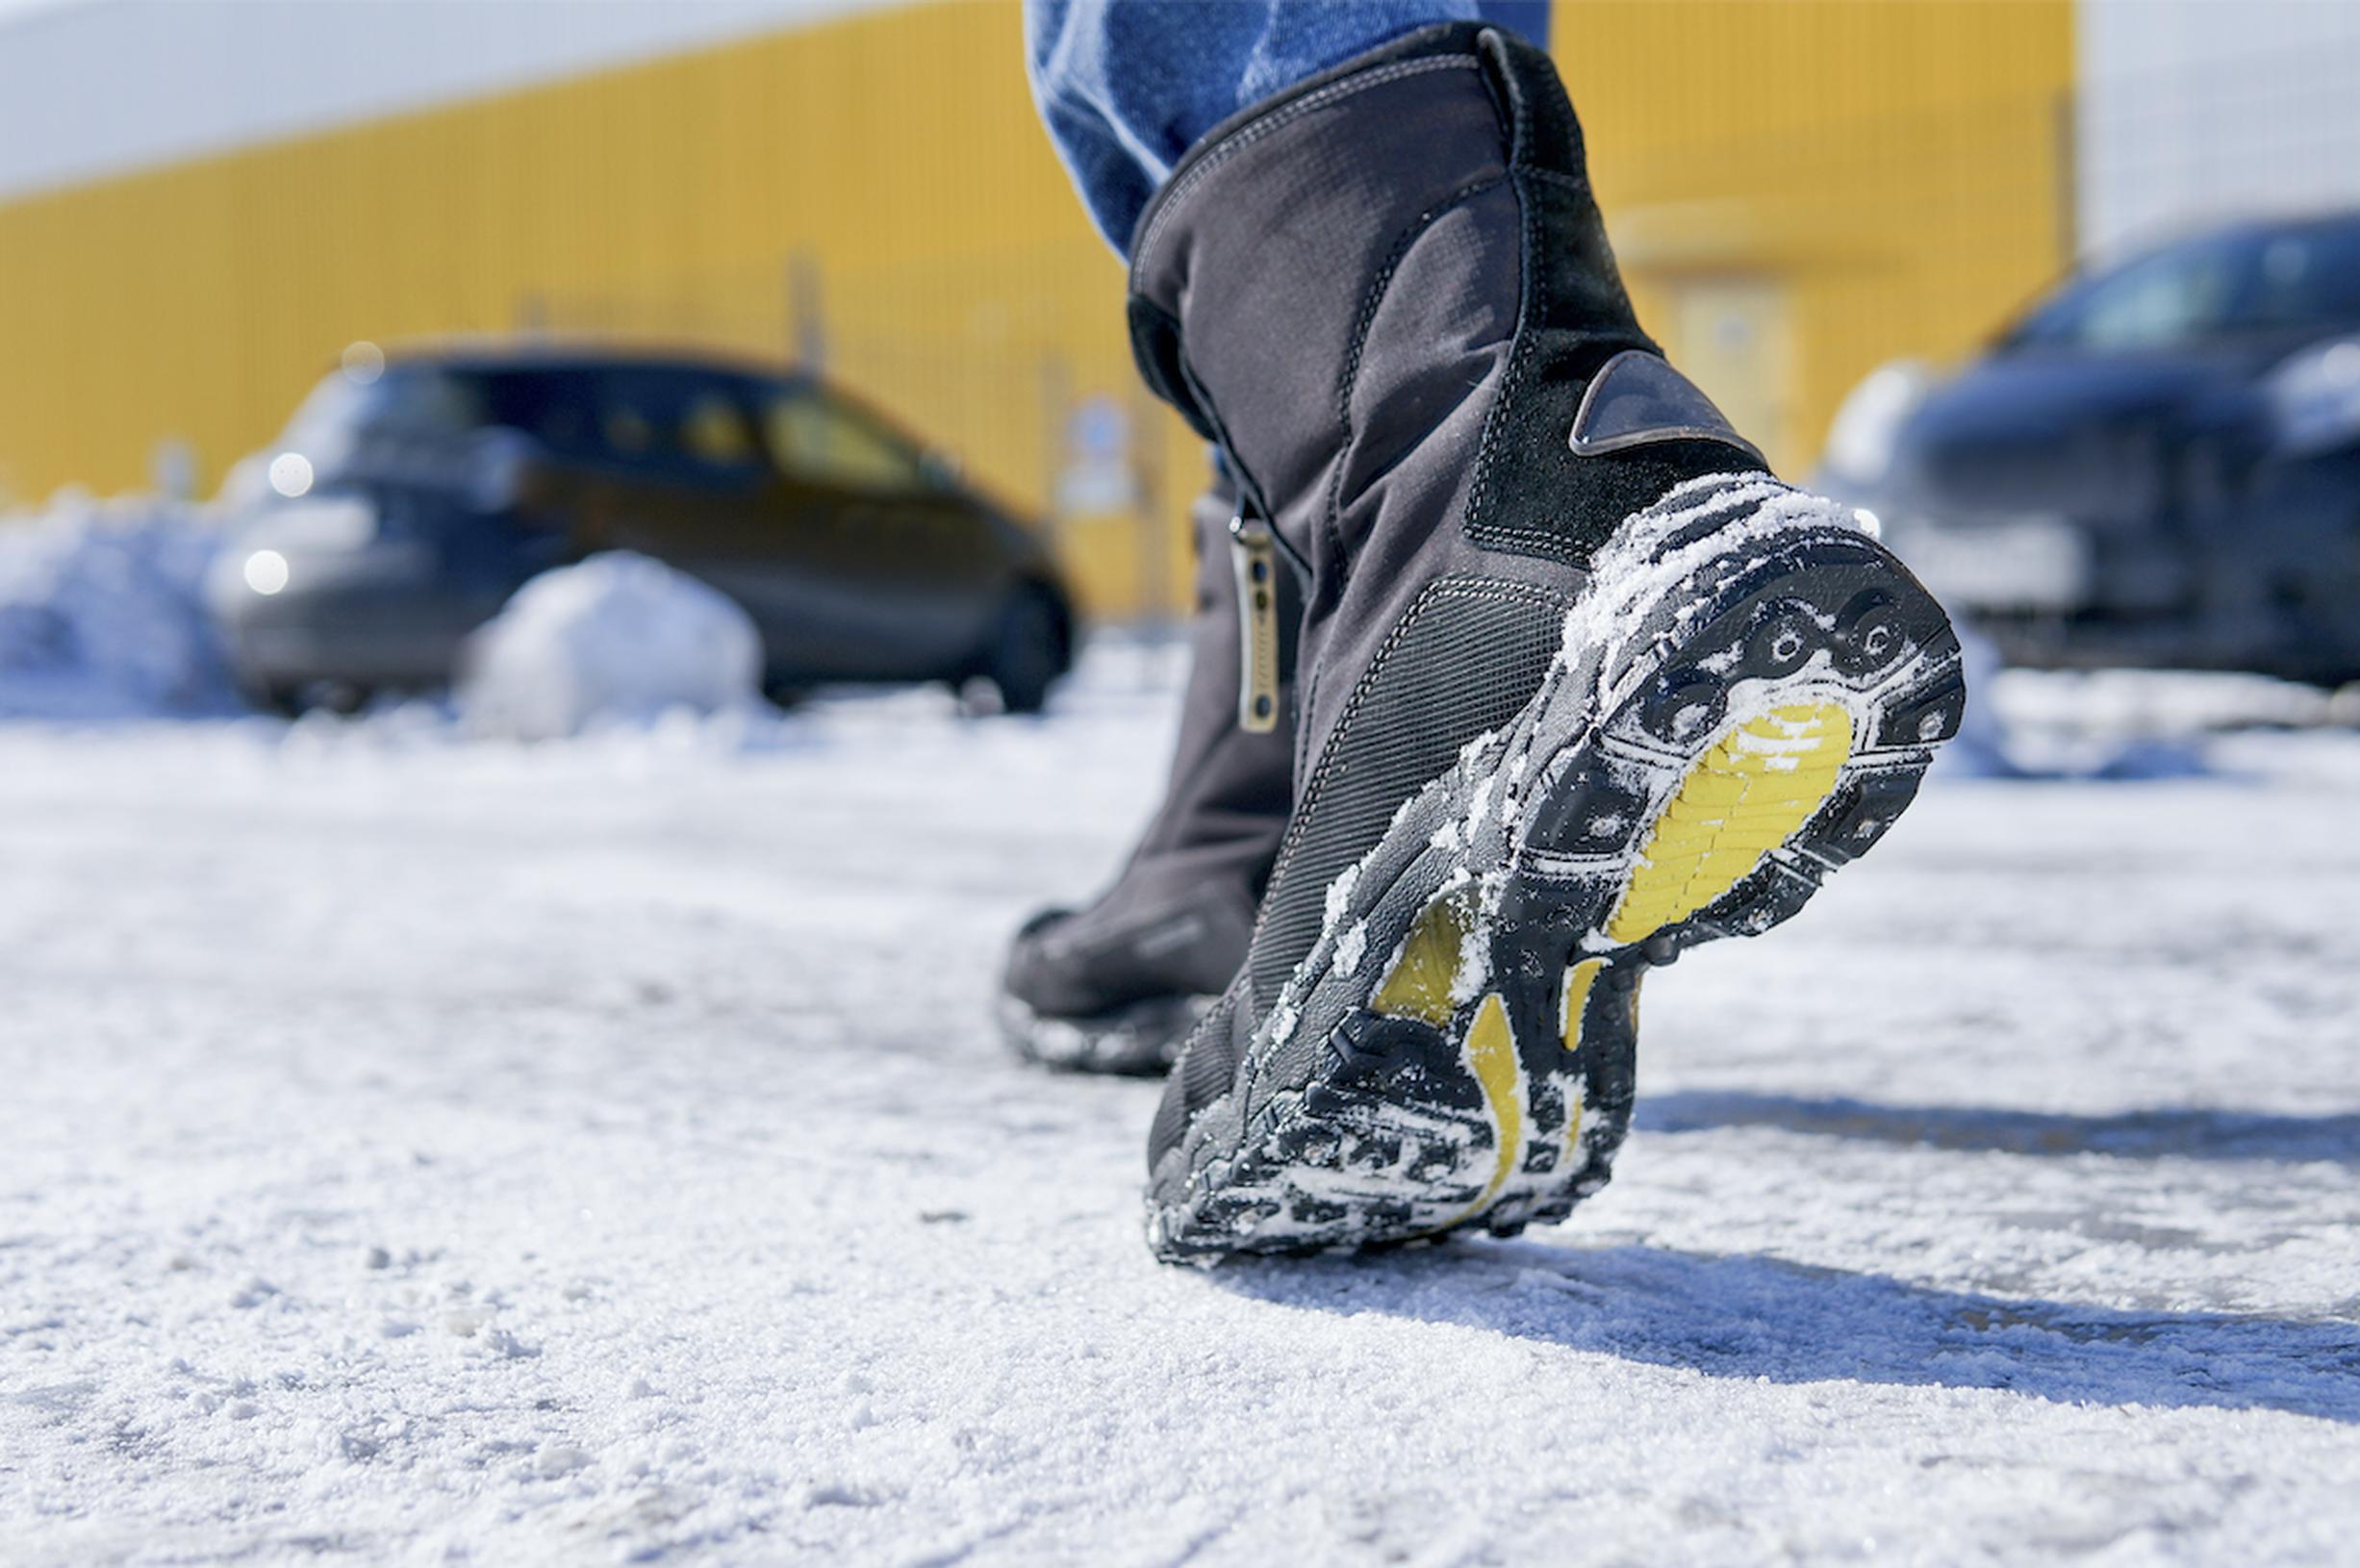 Preventing slips, trips and falls: when is it best to grit?